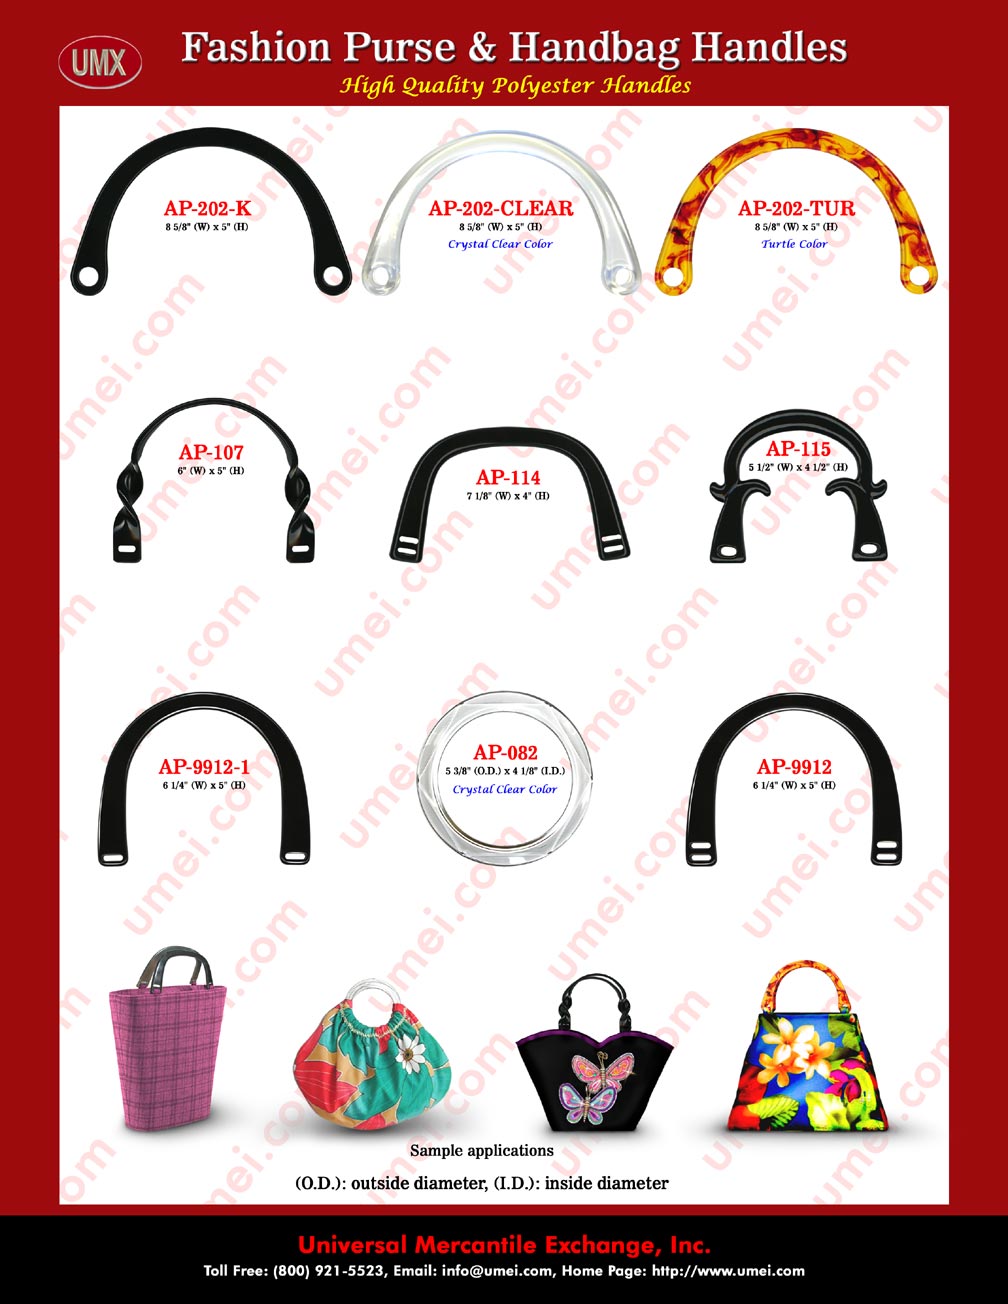 Are you looking for how to make purse instruction or how to make handbag instructions ? We provide how to apply our purses or handbags hardware instructions to make purse or to make handbag.